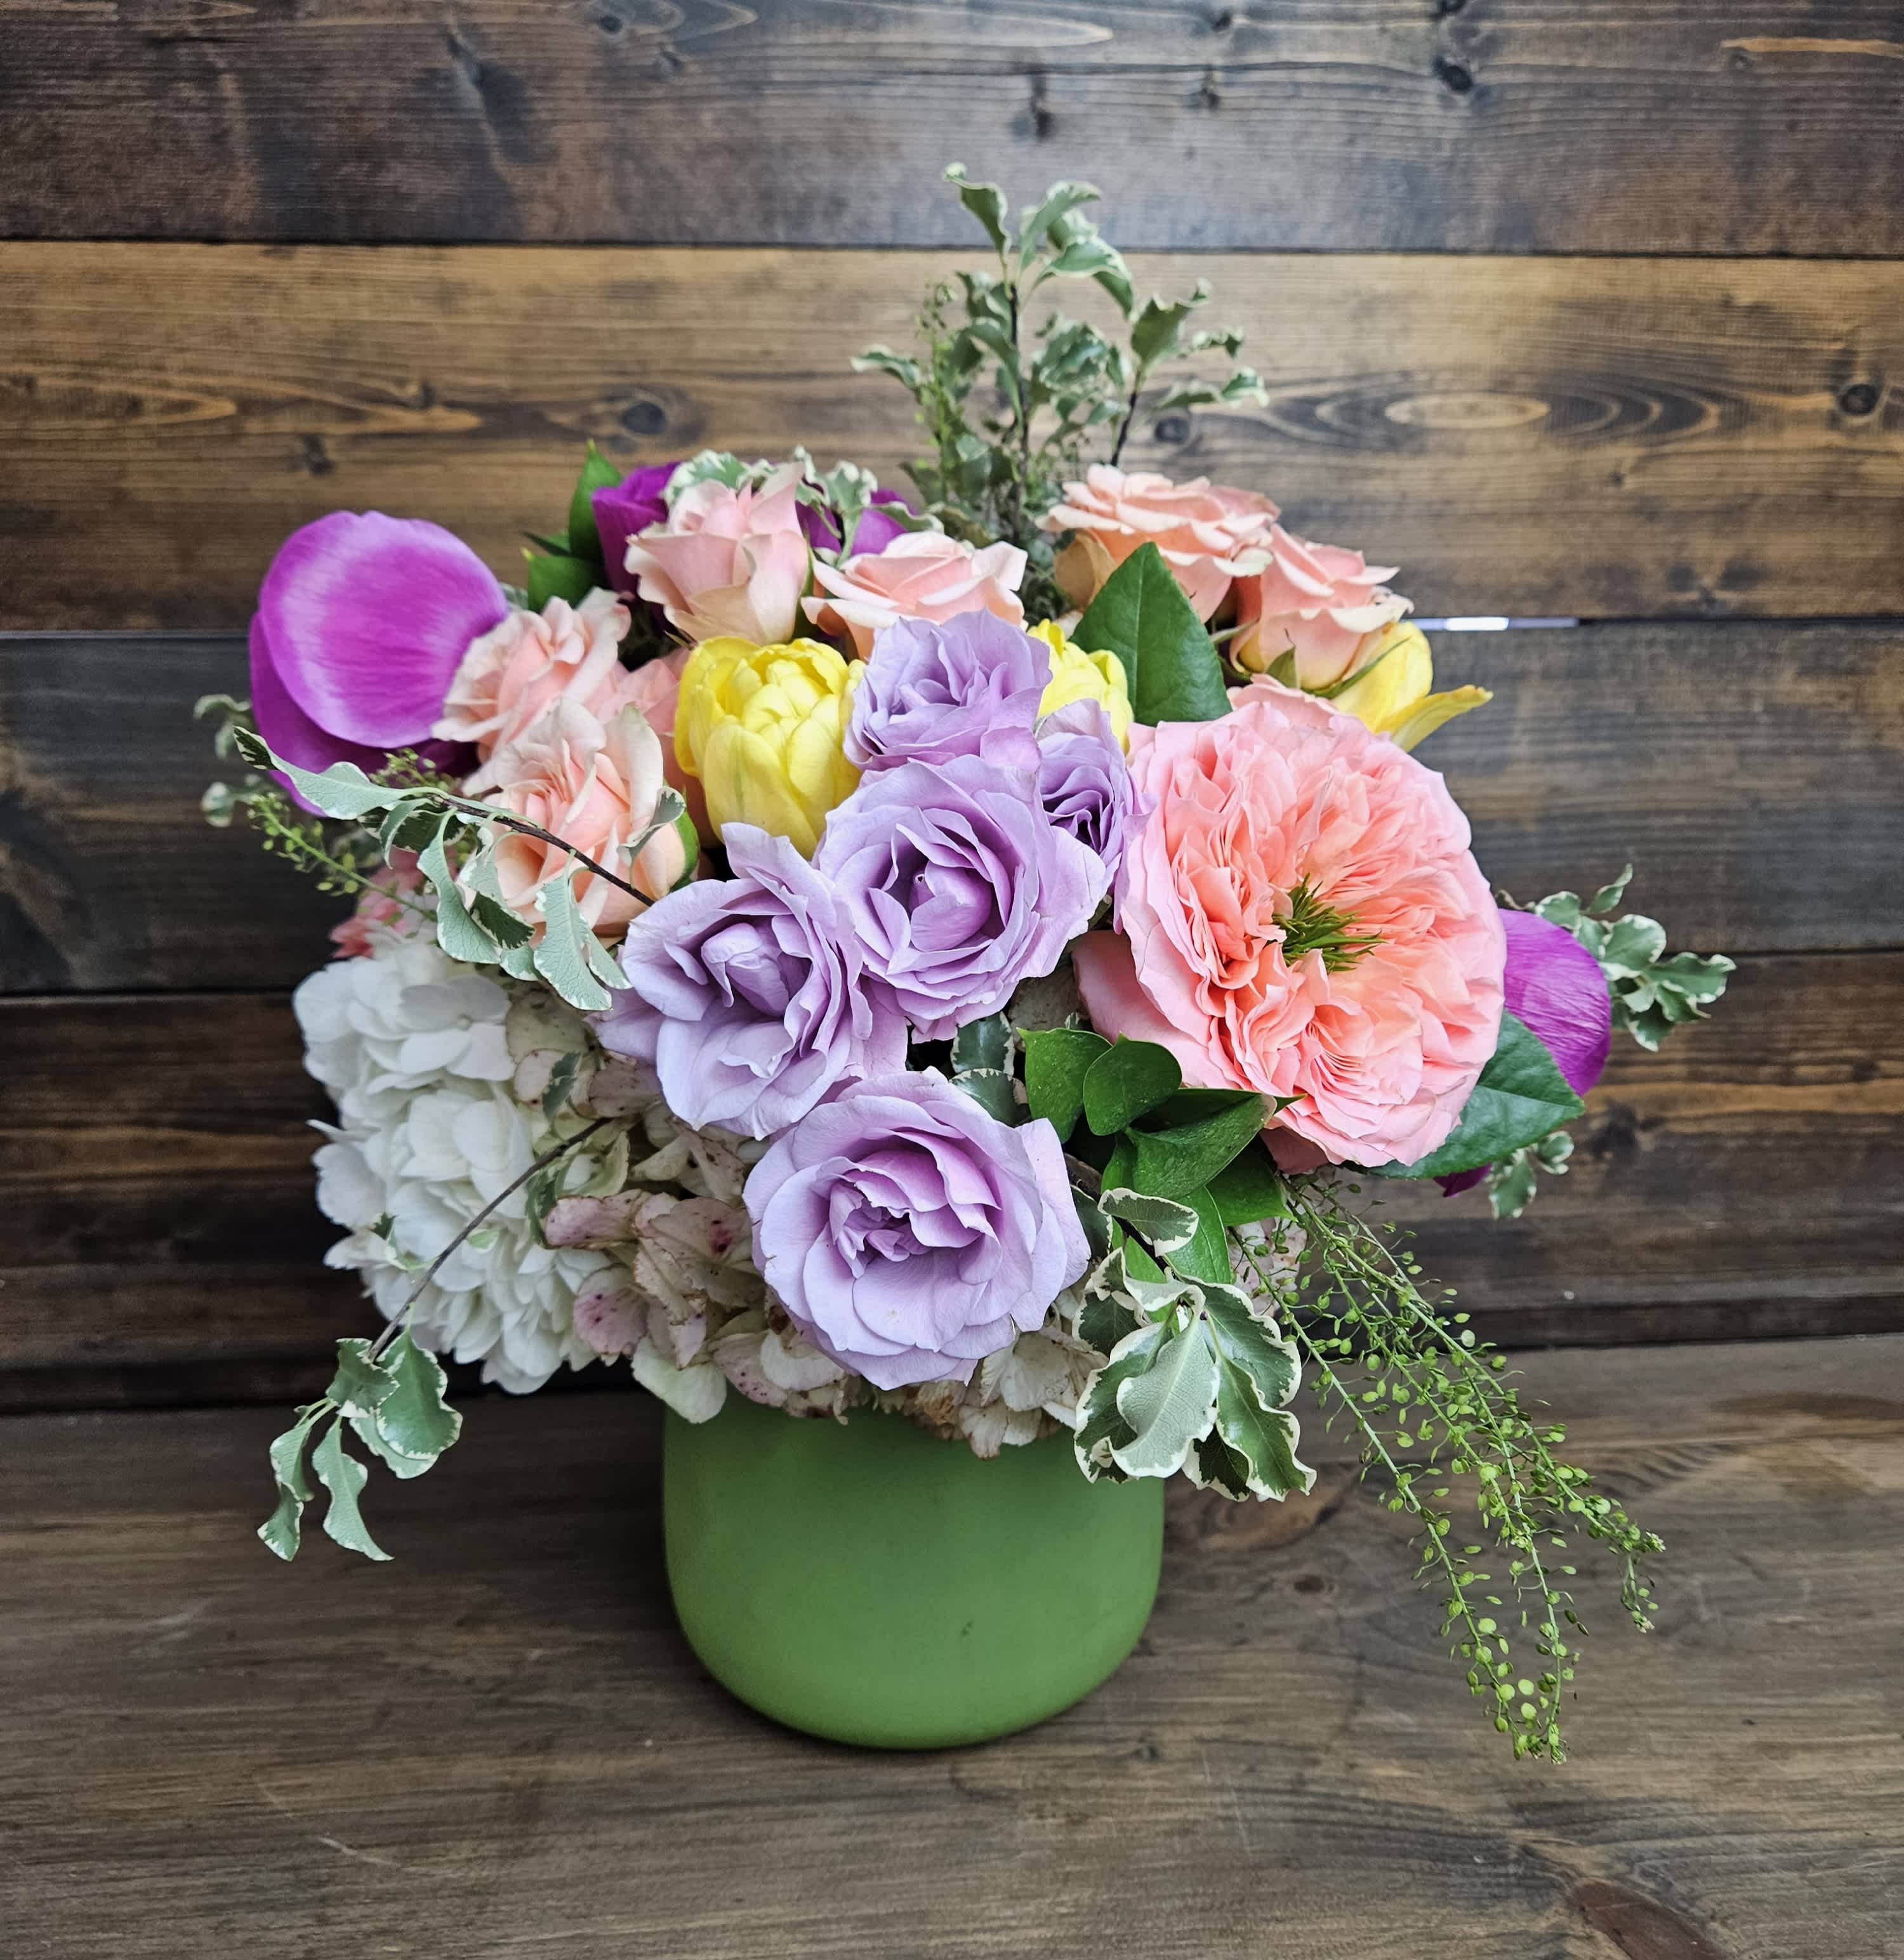 Spring Fling - Hydrangea, Anemones, Tulips, and Roses arranged to make a beautiful spring bouquet.